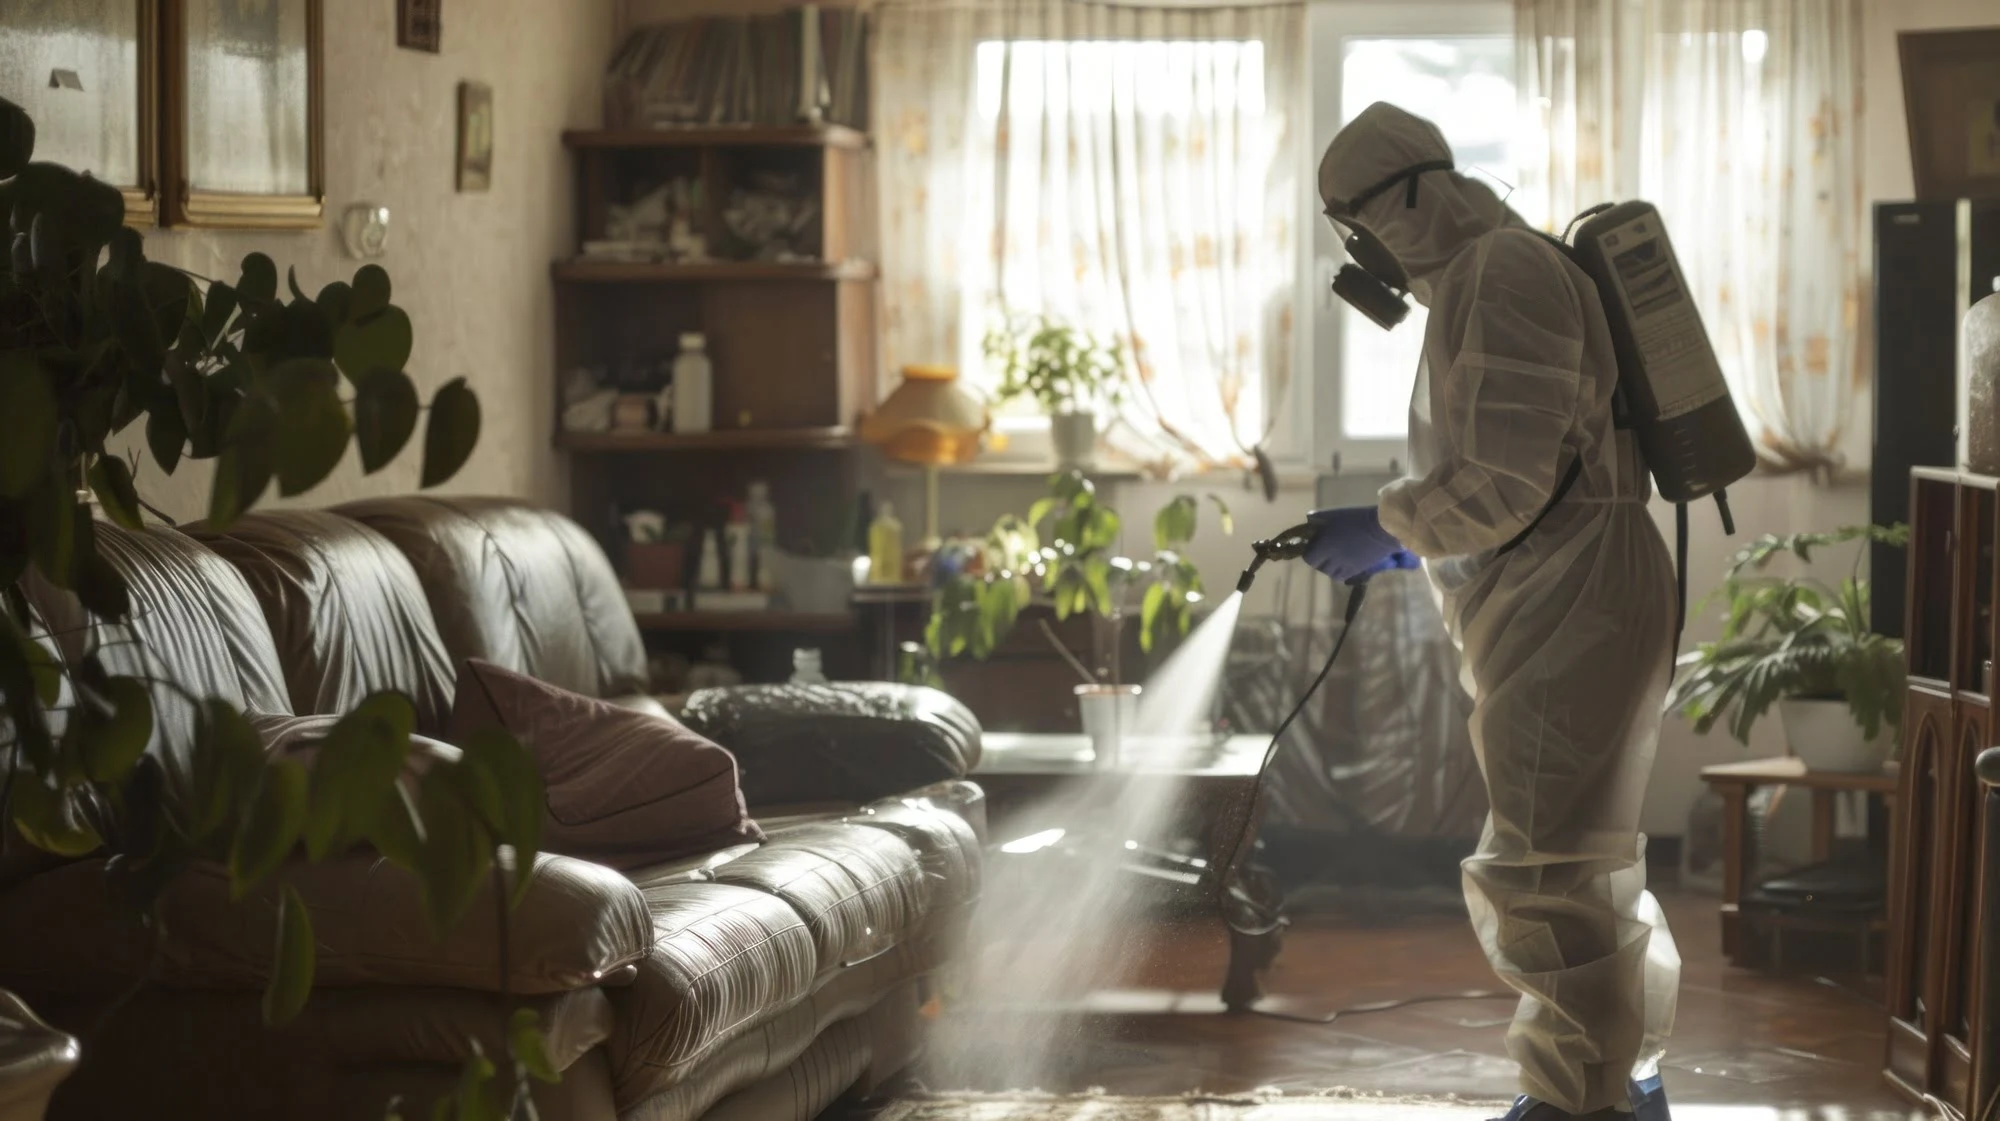 Biohazard Cleanup Service From All Hours Cleaning & Restoration